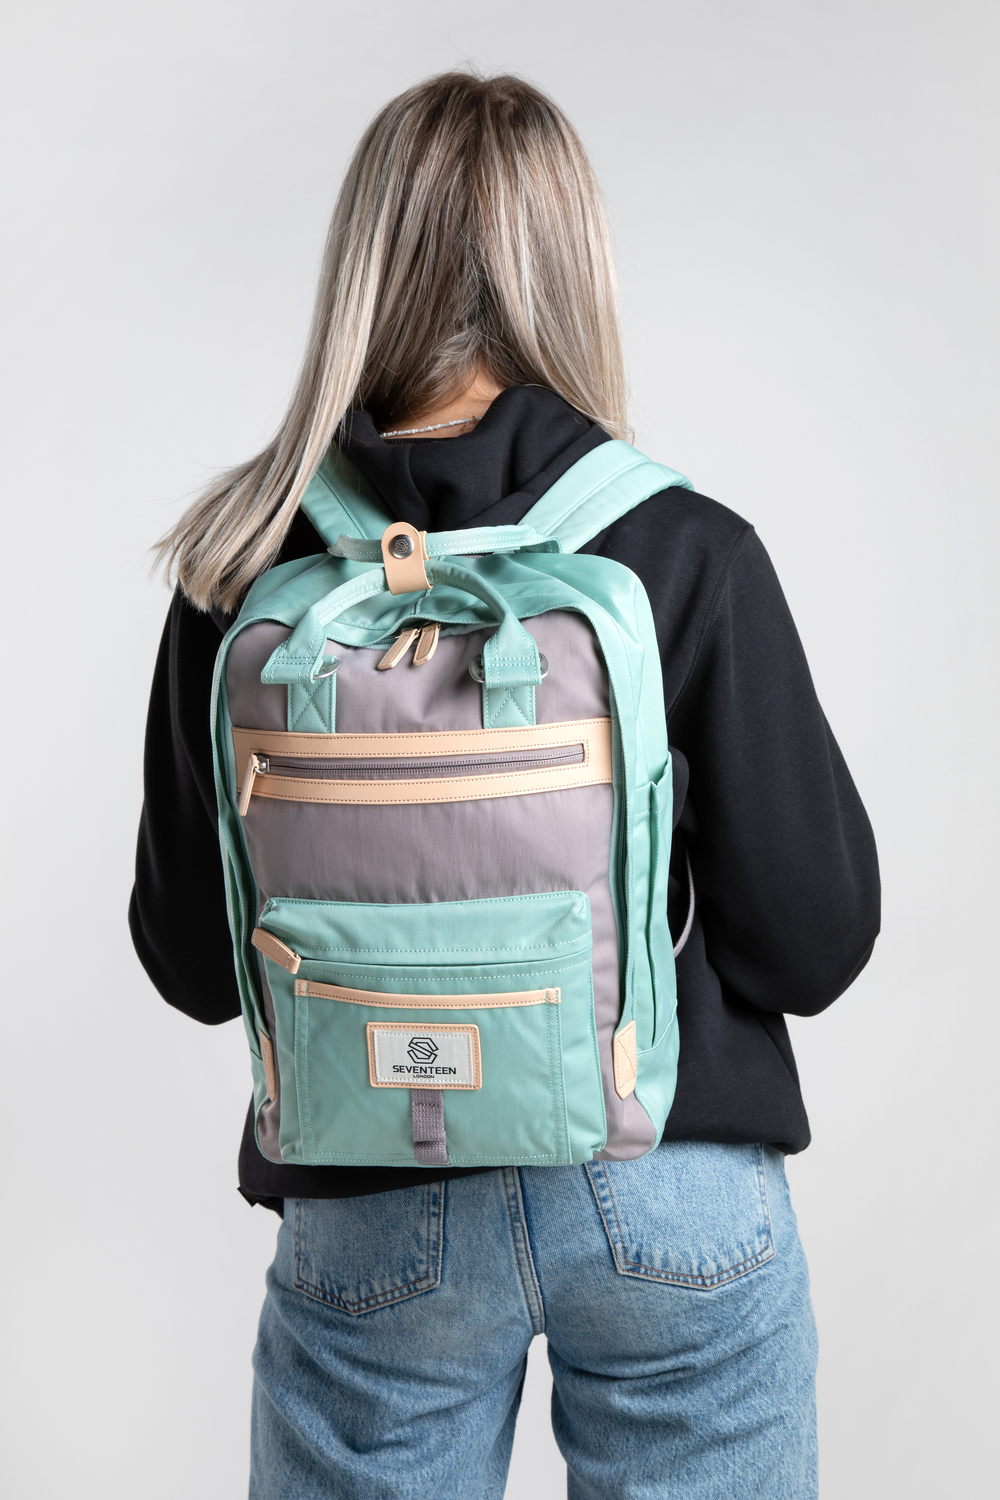 The Wimbledon Backpack - Pastel Green with Grey